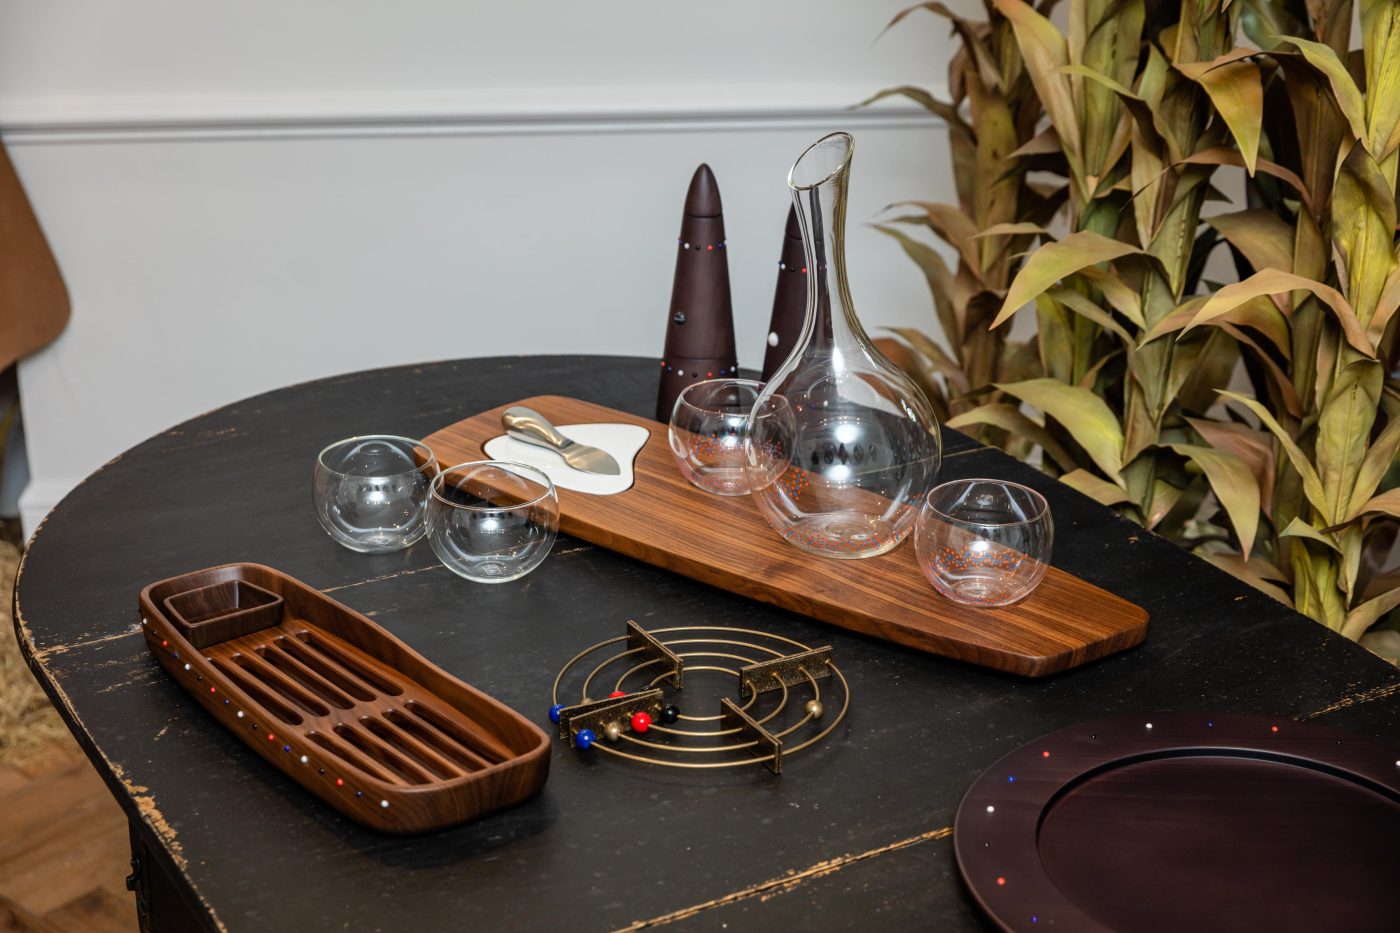 Tabletop pieces from SoShiro's Pok collection